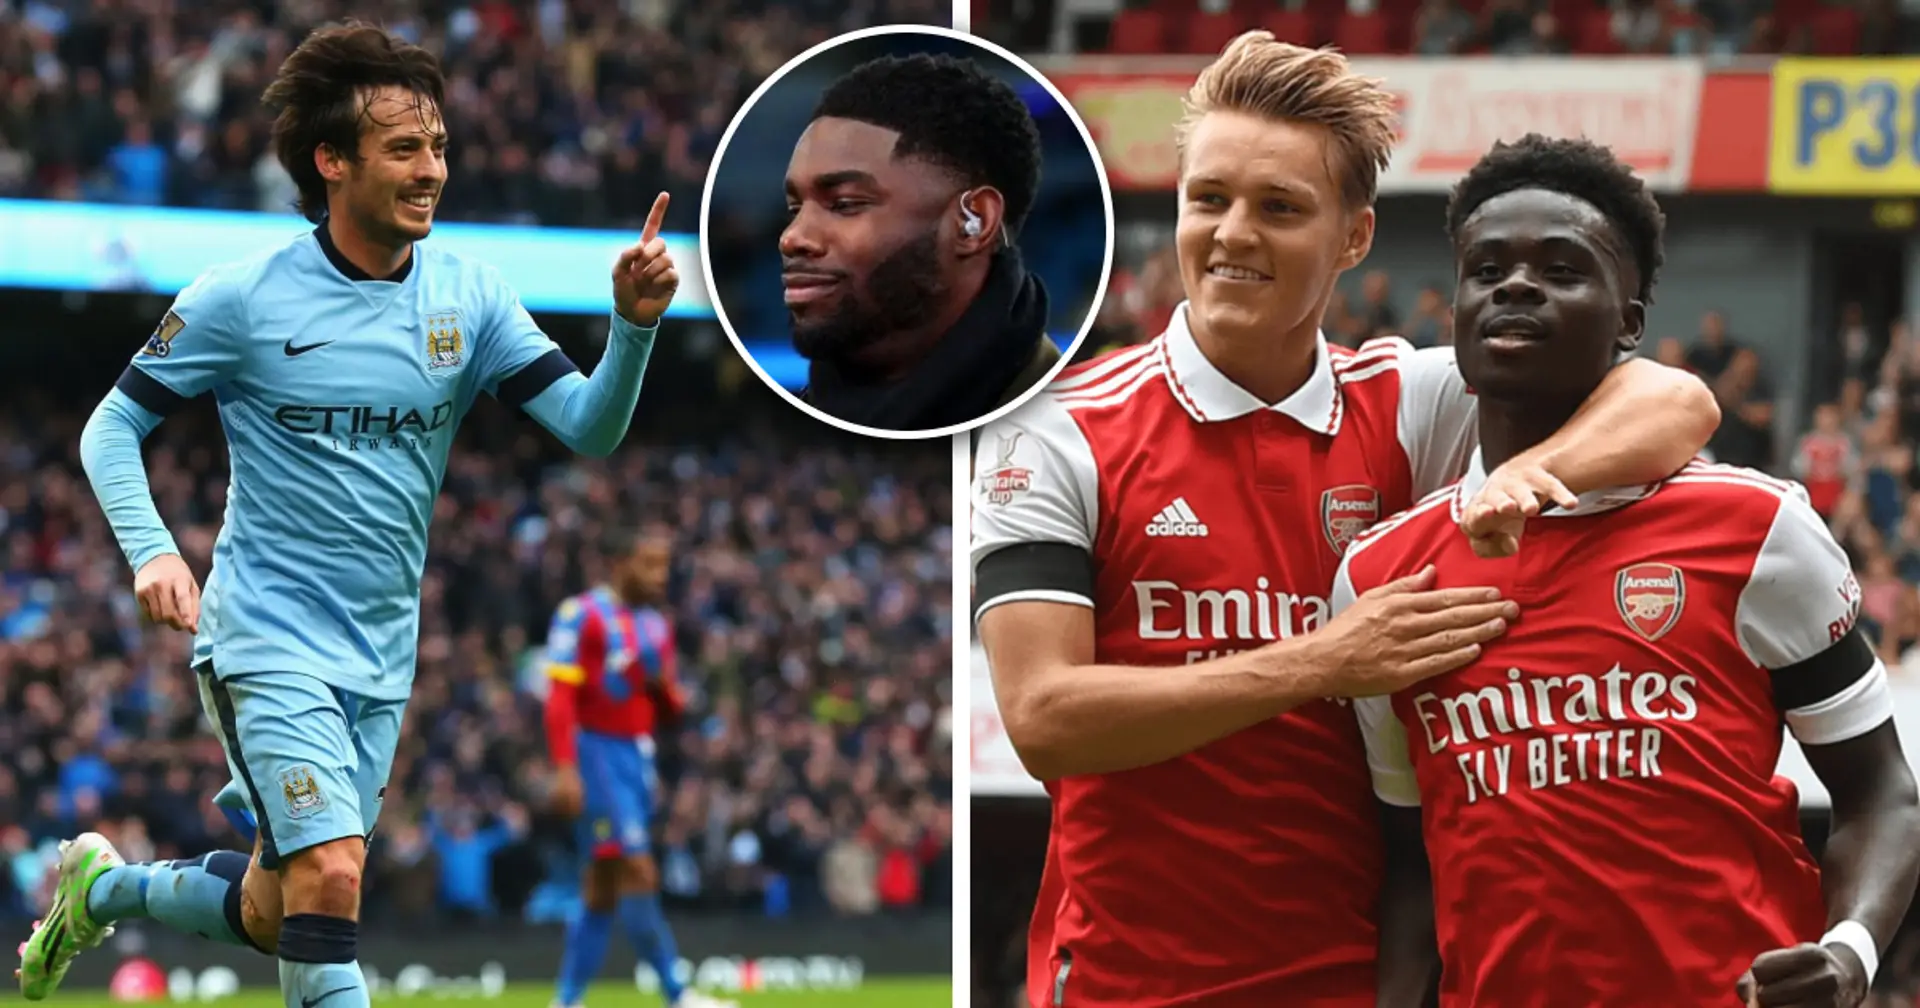 'He reminds me of David Silva in so many ways': Micah Richards compared one Arsenal player with his former teammate